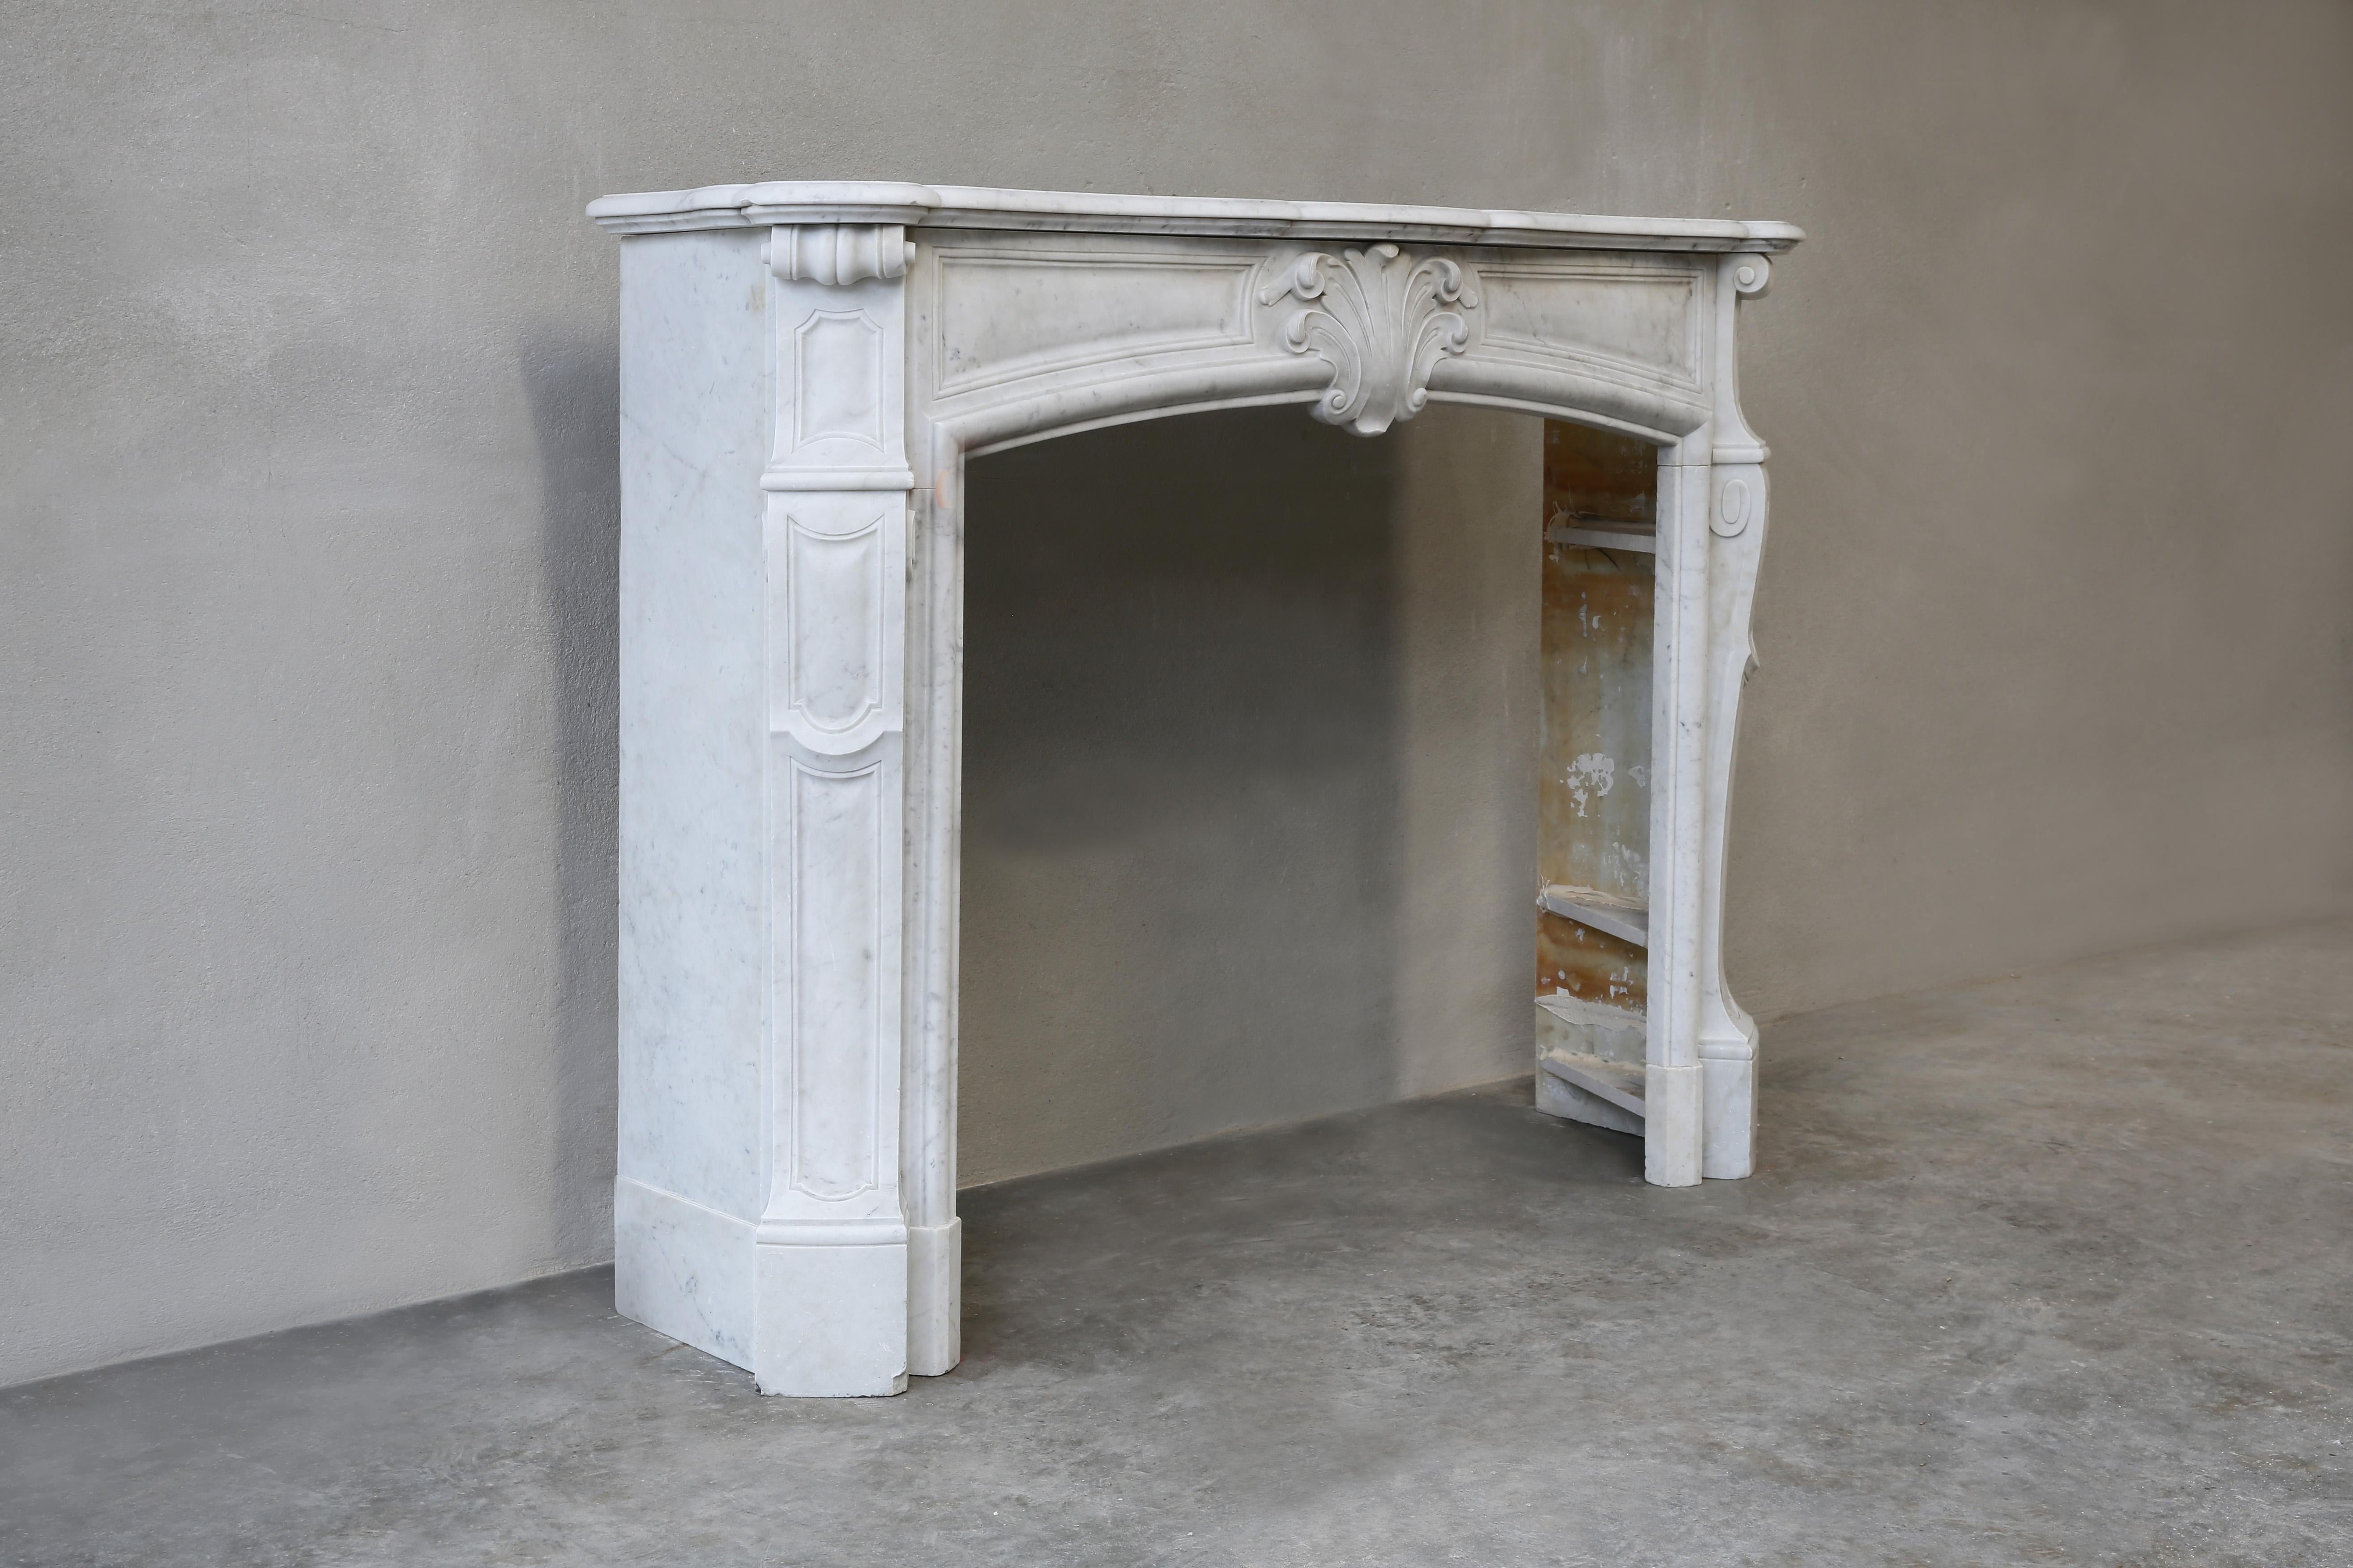 A 19th century fireplace in Louis XV style with a scallop in the middle! This elegant mantel (fireplace) has beautiful round shapes and lines and is chiselled by hand from Carrara marble. Carrara marble is originally from Carrara, a city in Tuscany!